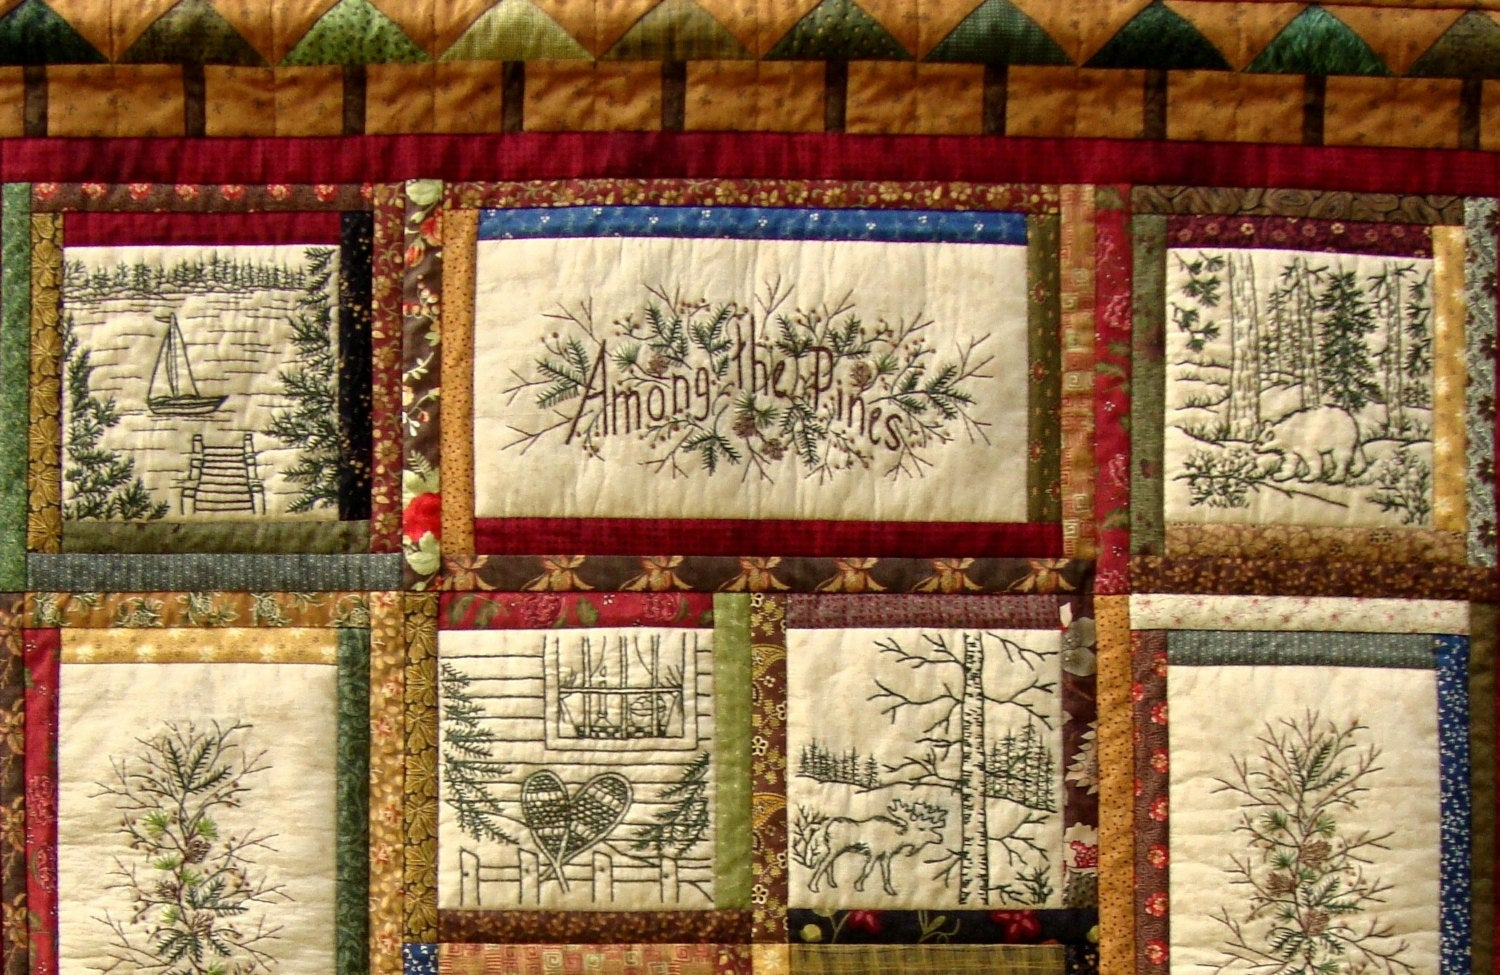 Hand Embroidery Quilt Patterns Among The Pines Quilt Pattern 10 Hand Embroidery Blocks Label Quilt Finishing Pattern Beth Ritter Instant Digital Download